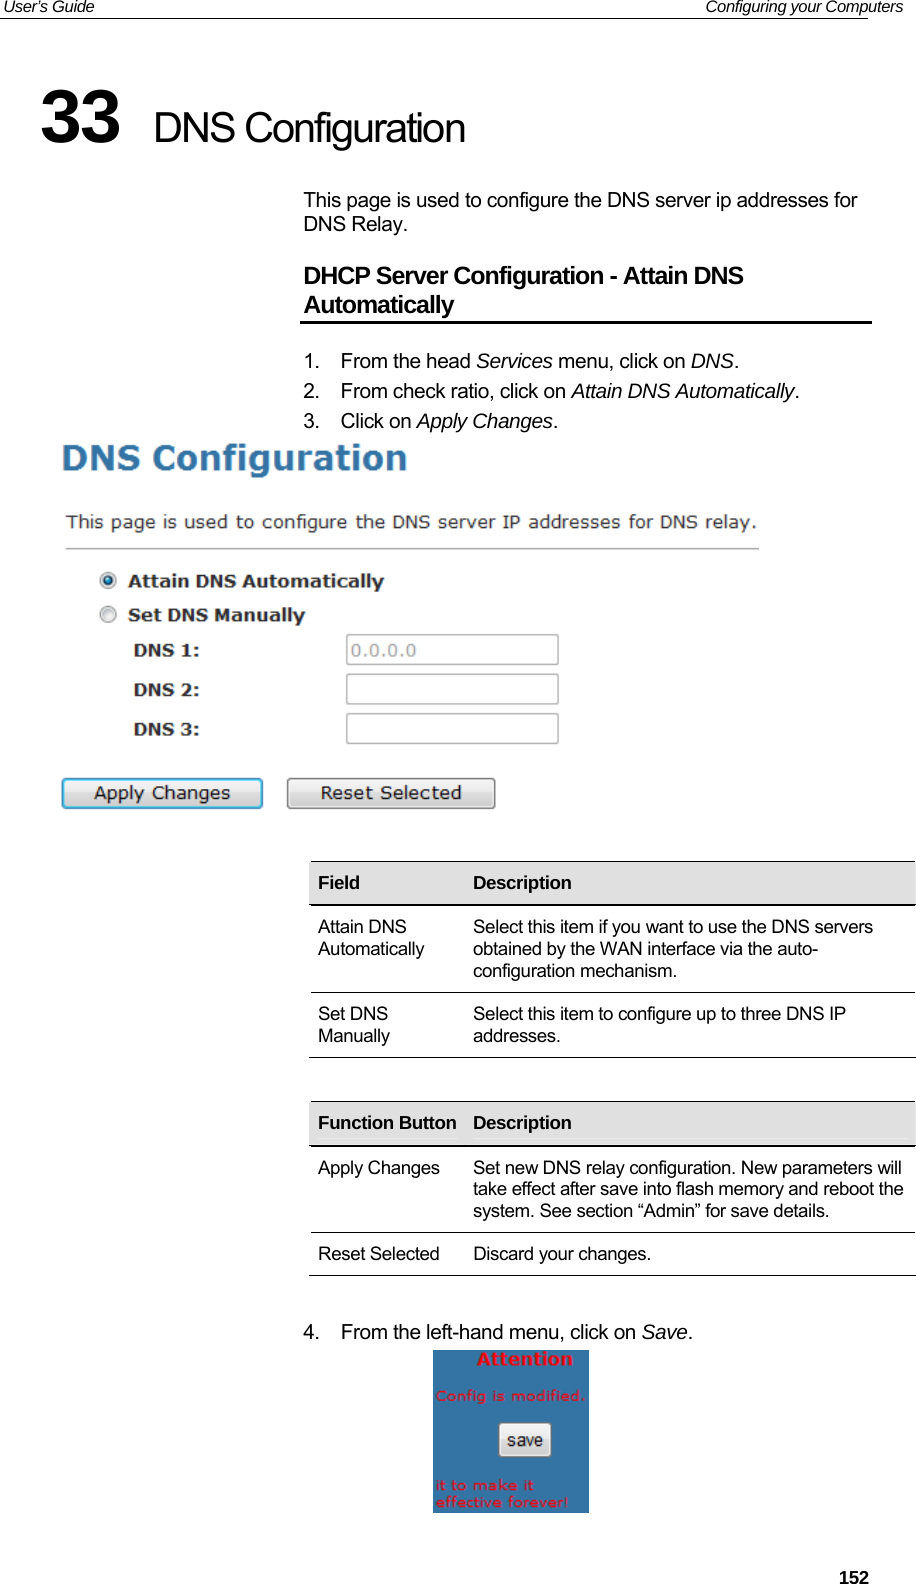 User’s Guide   Configuring your Computers 33  DNS Configuration This page is used to configure the DNS server ip addresses for DNS Relay. DHCP Server Configuration - Attain DNS Automatically 1. From the head Services menu, click on DNS. 2.  From check ratio, click on Attain DNS Automatically. 3. Click on Apply Changes.     Field  Description Attain DNS Automatically Select this item if you want to use the DNS servers obtained by the WAN interface via the auto-configuration mechanism. Set DNS Manually Select this item to configure up to three DNS IP addresses.         Function Button Description    Apply Changes  Set new DNS relay configuration. New parameters will take effect after save into flash memory and reboot the system. See section “Admin” for save details. Reset Selected  Discard your changes.  4.  From the left-hand menu, click on Save.   152